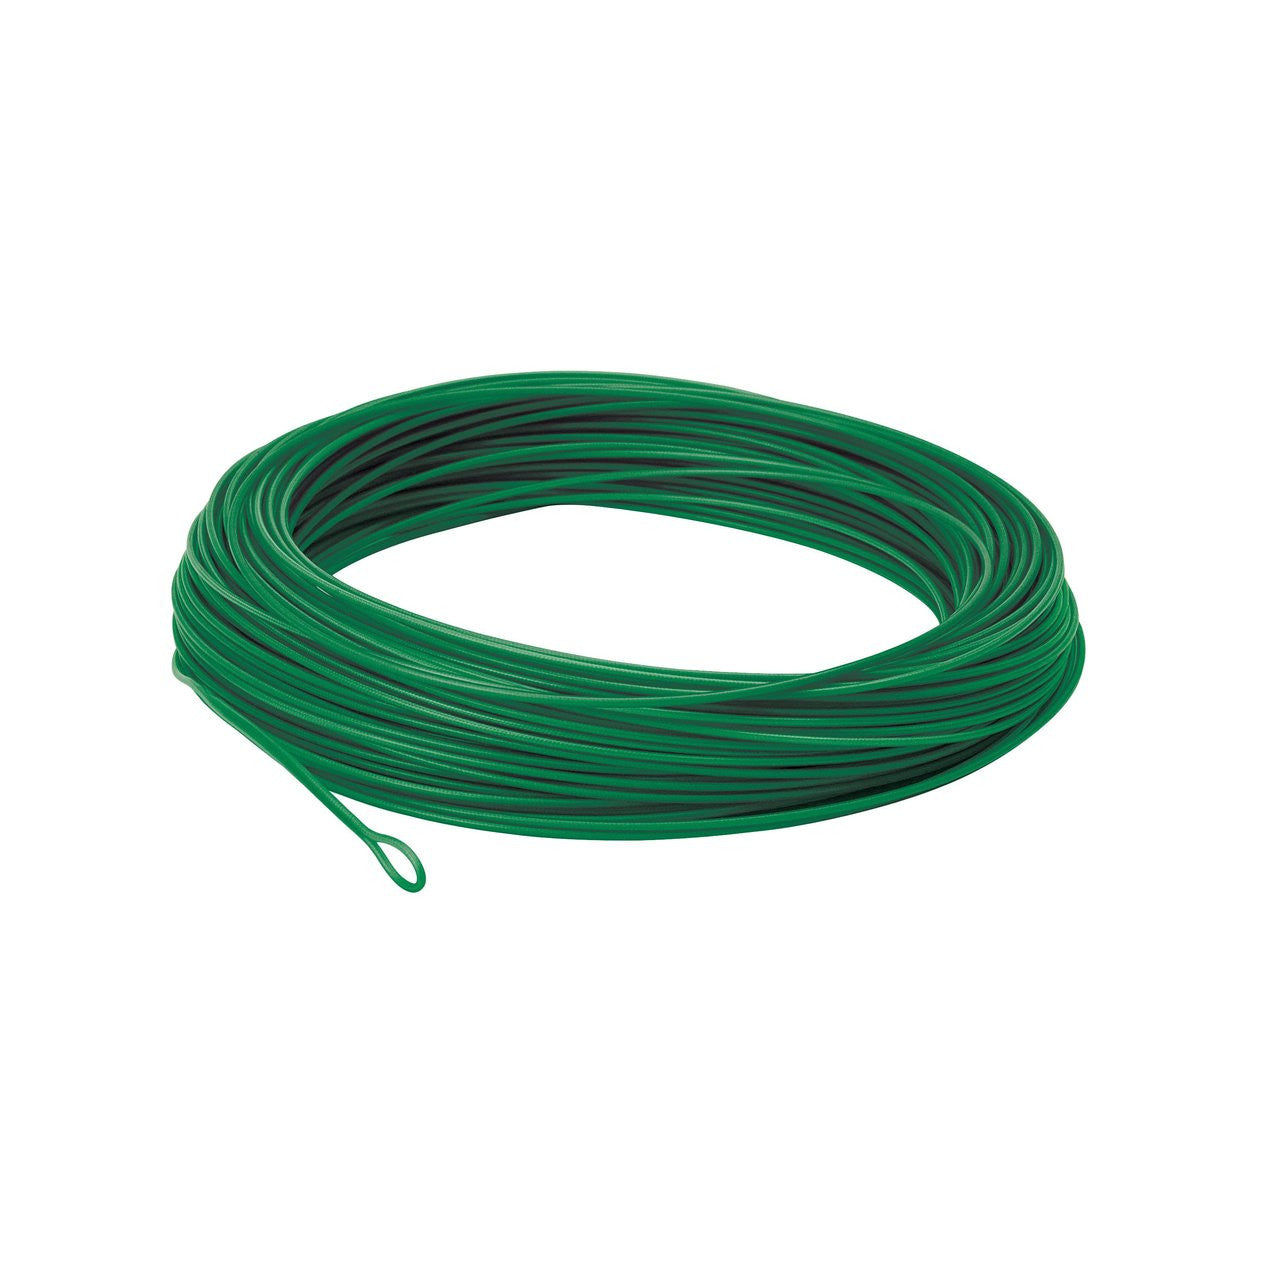 Cortland Competition Slow Intermediate Sinking Fly Line